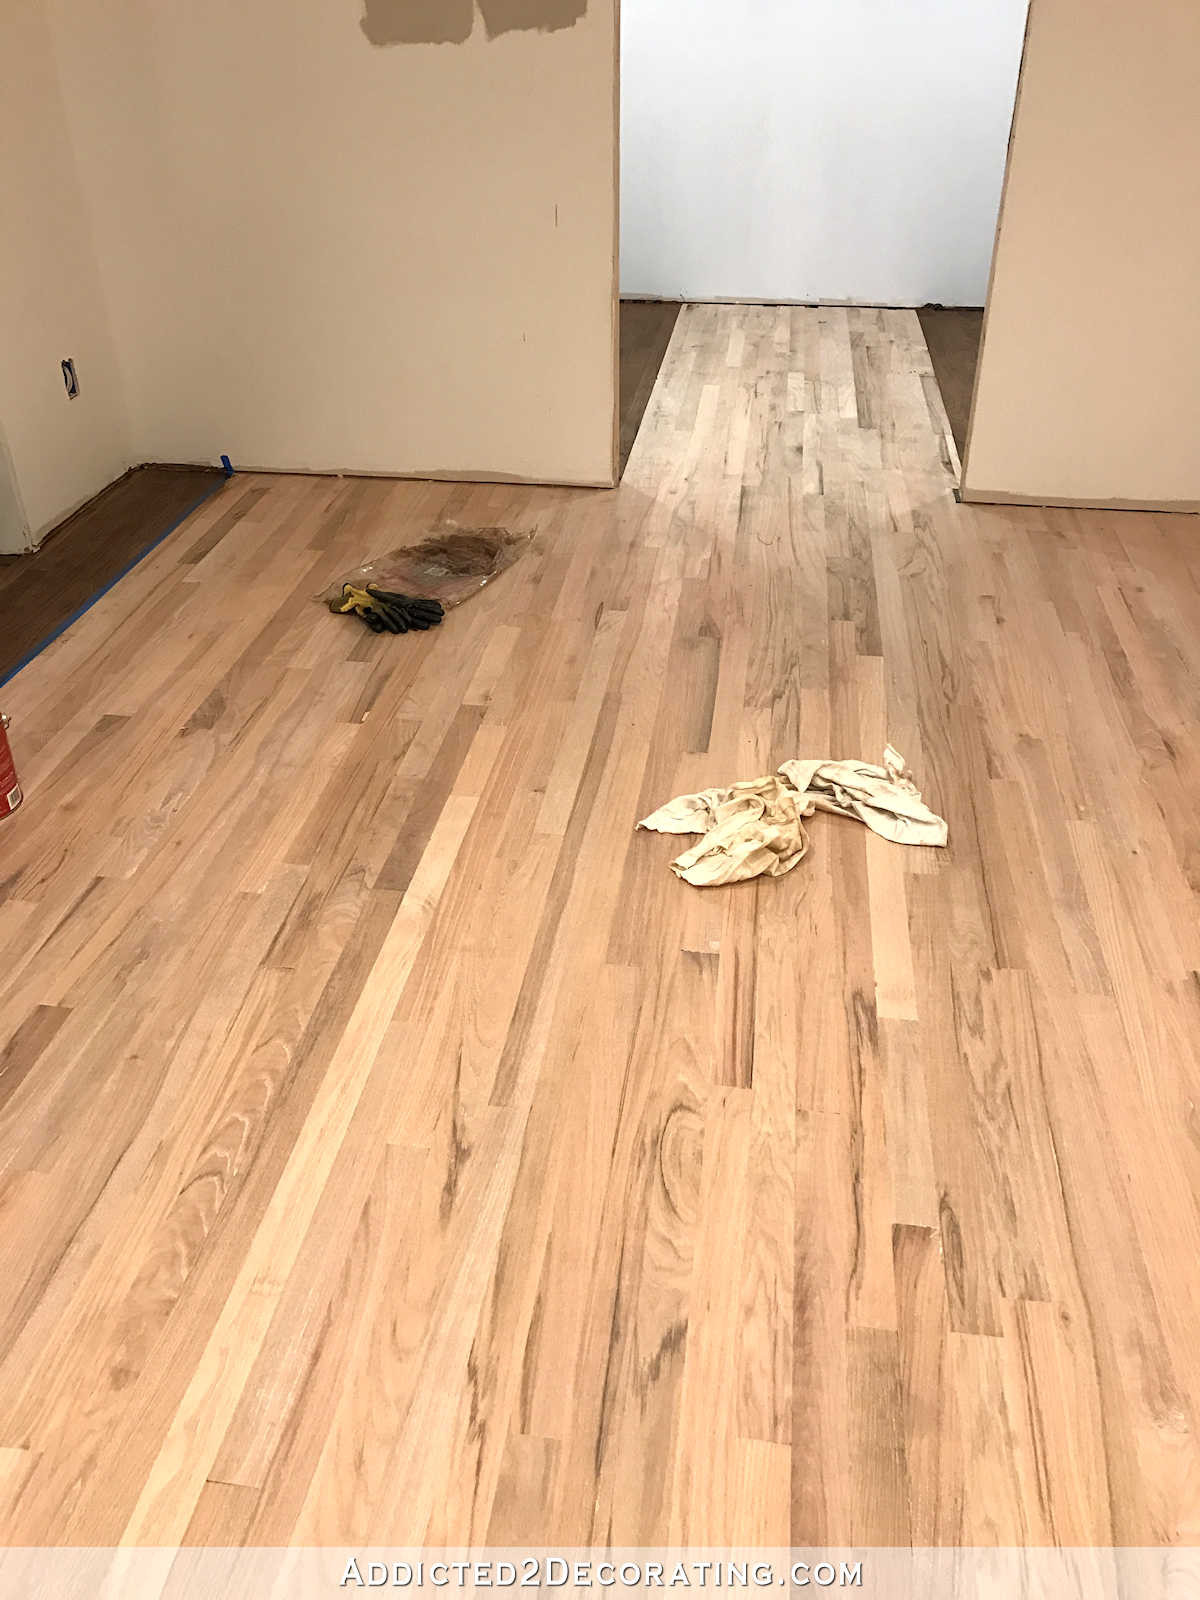 hardwood floor installation cost denver of adventures in staining my red oak hardwood floors products process intended for staining red oak hardwood floors 12 breakfast room and center of pantry left to